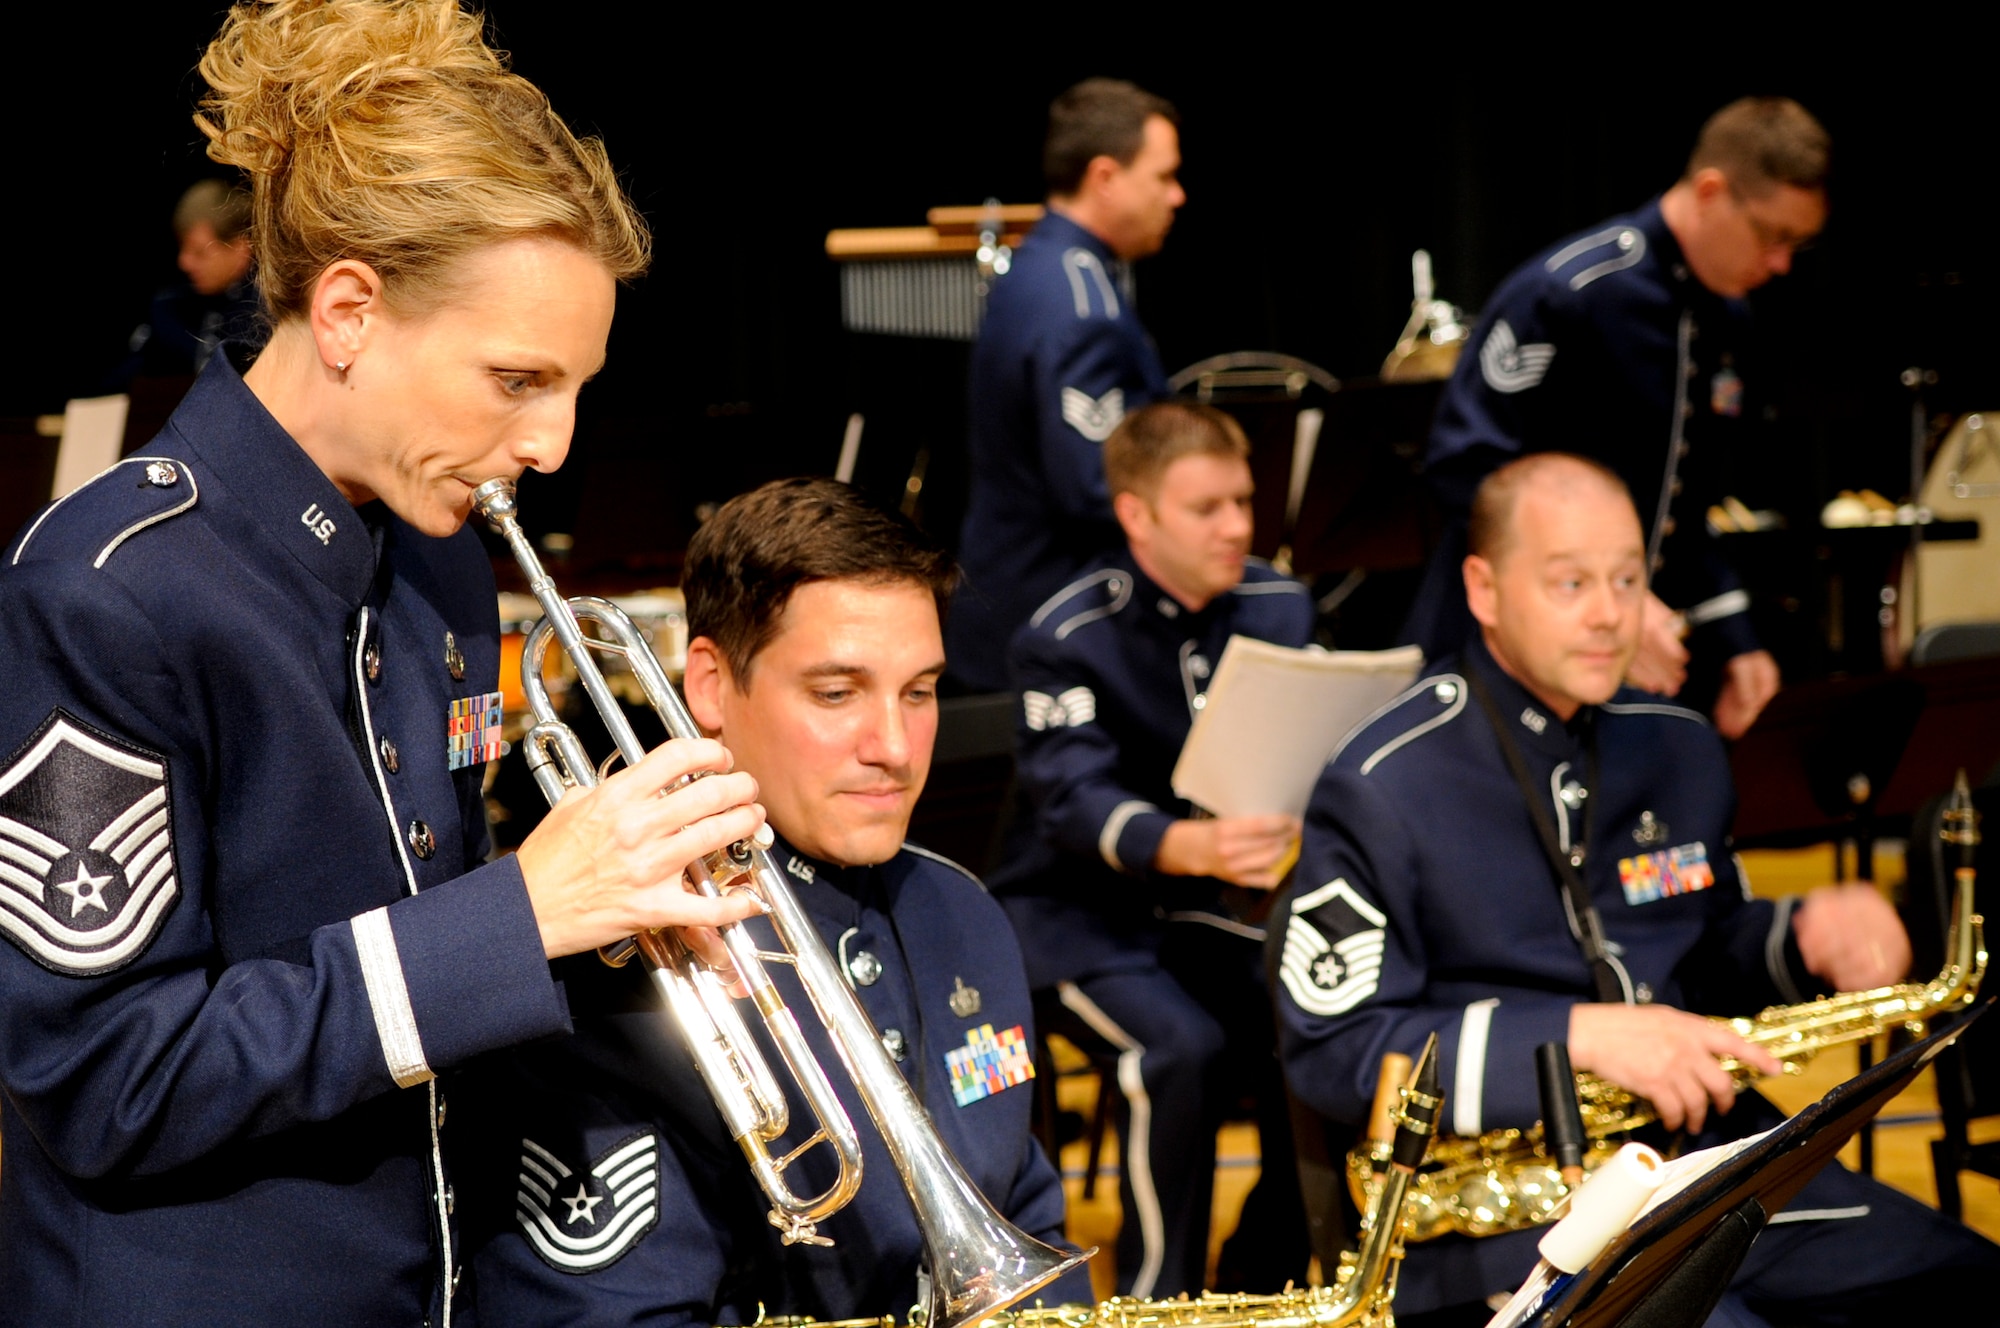 Master Sgt. Carie Cufer of the 555th Air Force Band, tests her pitch with Saxophonist, Tech. Sgt. Brian Bigelow before a concert July 7, 2012. The 555th, commonly known as the Triple Nickel, dating back to 1923, is scheduled to be officially deactivated in 2013, performed its final concert after nearly a century of service to members of the Armed Forces and the nation. (U.S. Air Force photo by Master Sgt. Beth Holliker/Released)